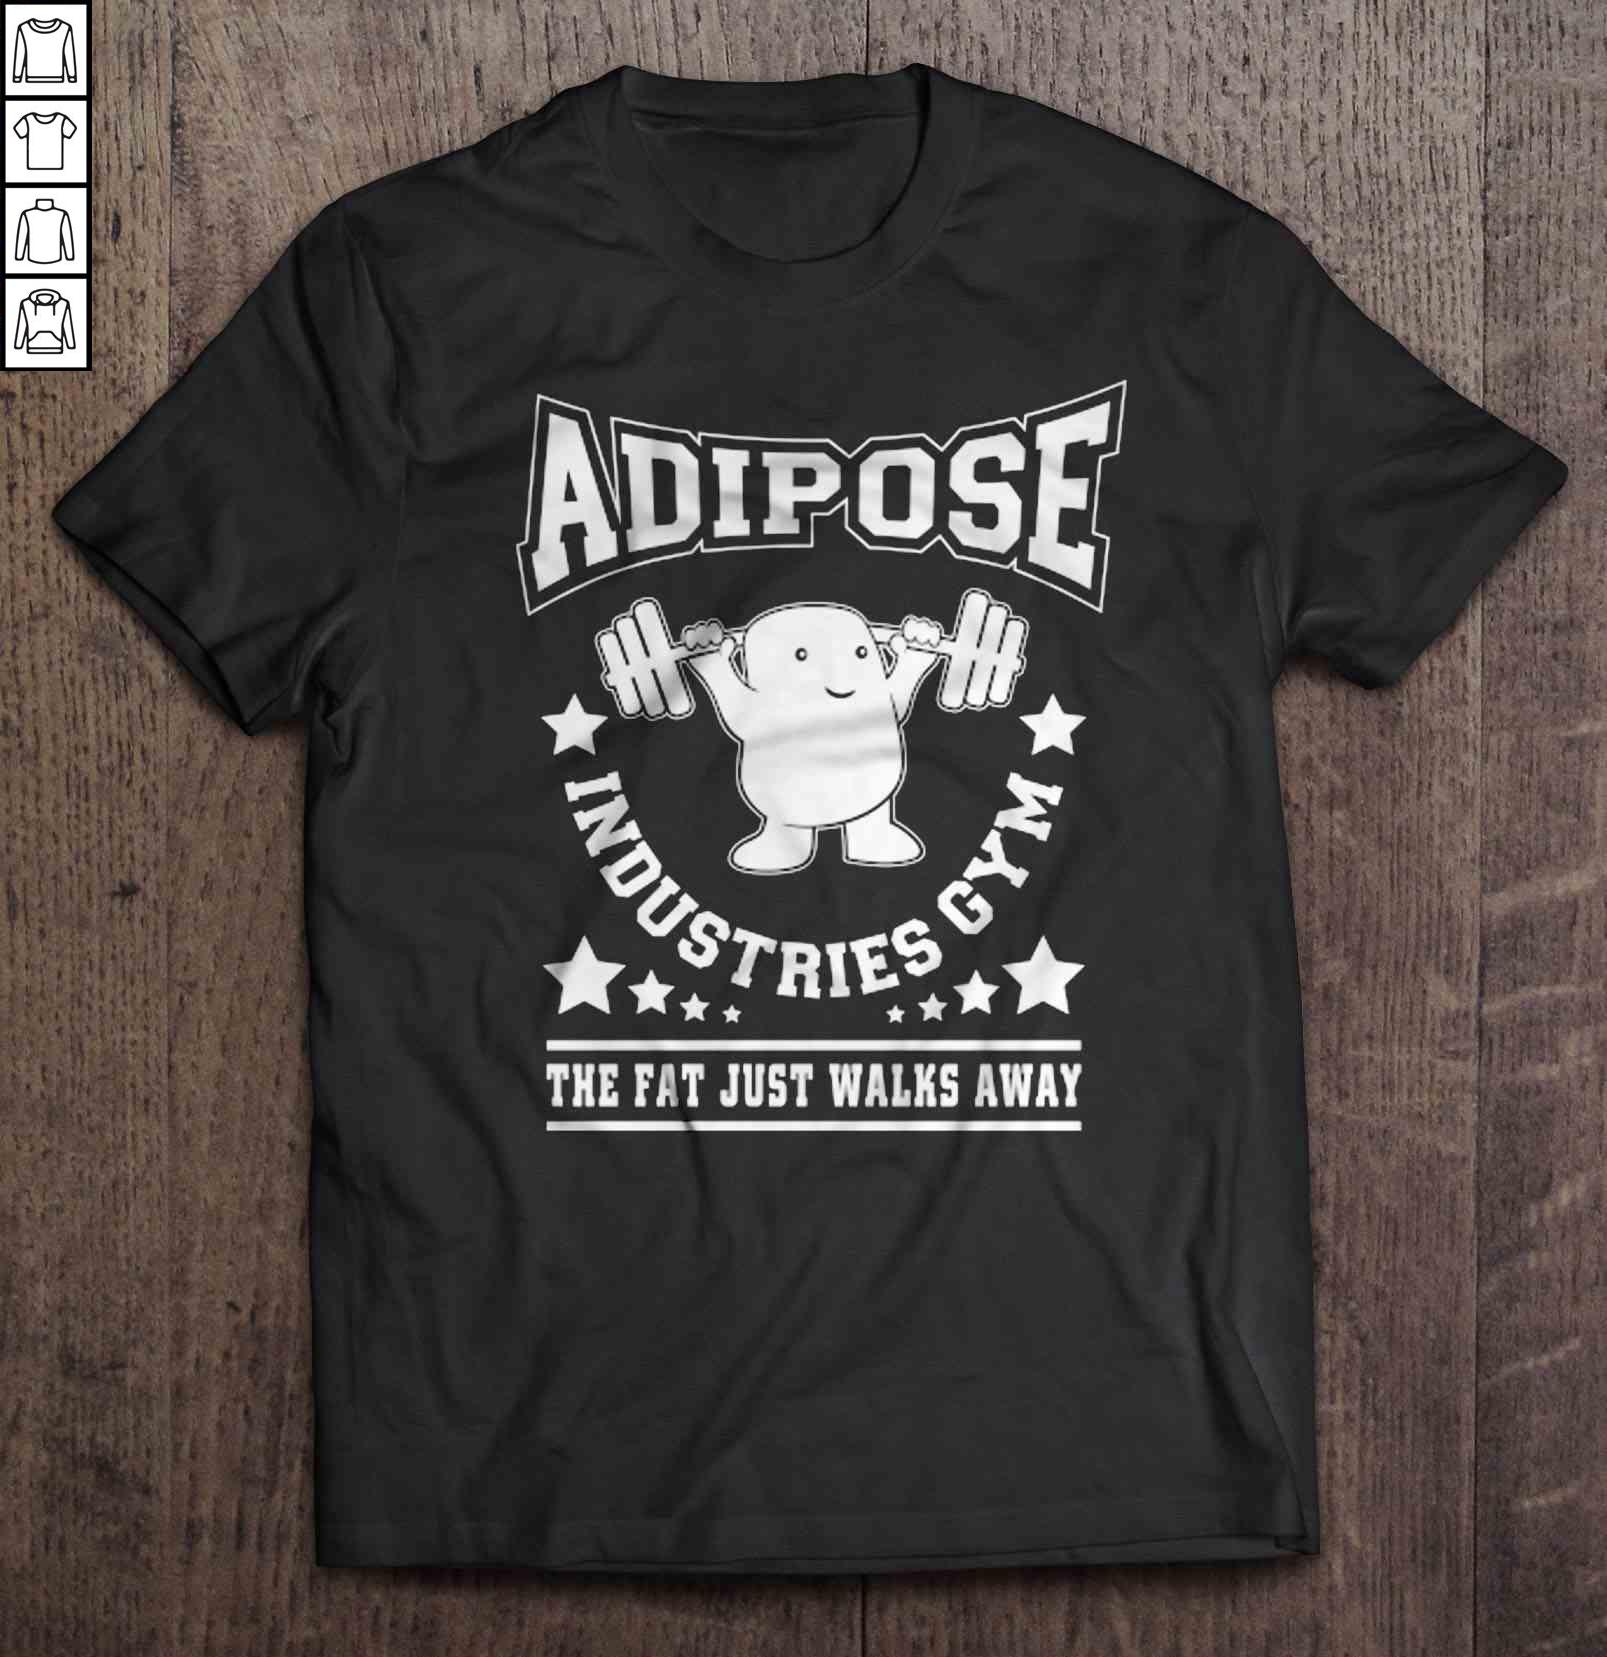 Adipose Industries Gym The Fat Just Walks Away Shirt